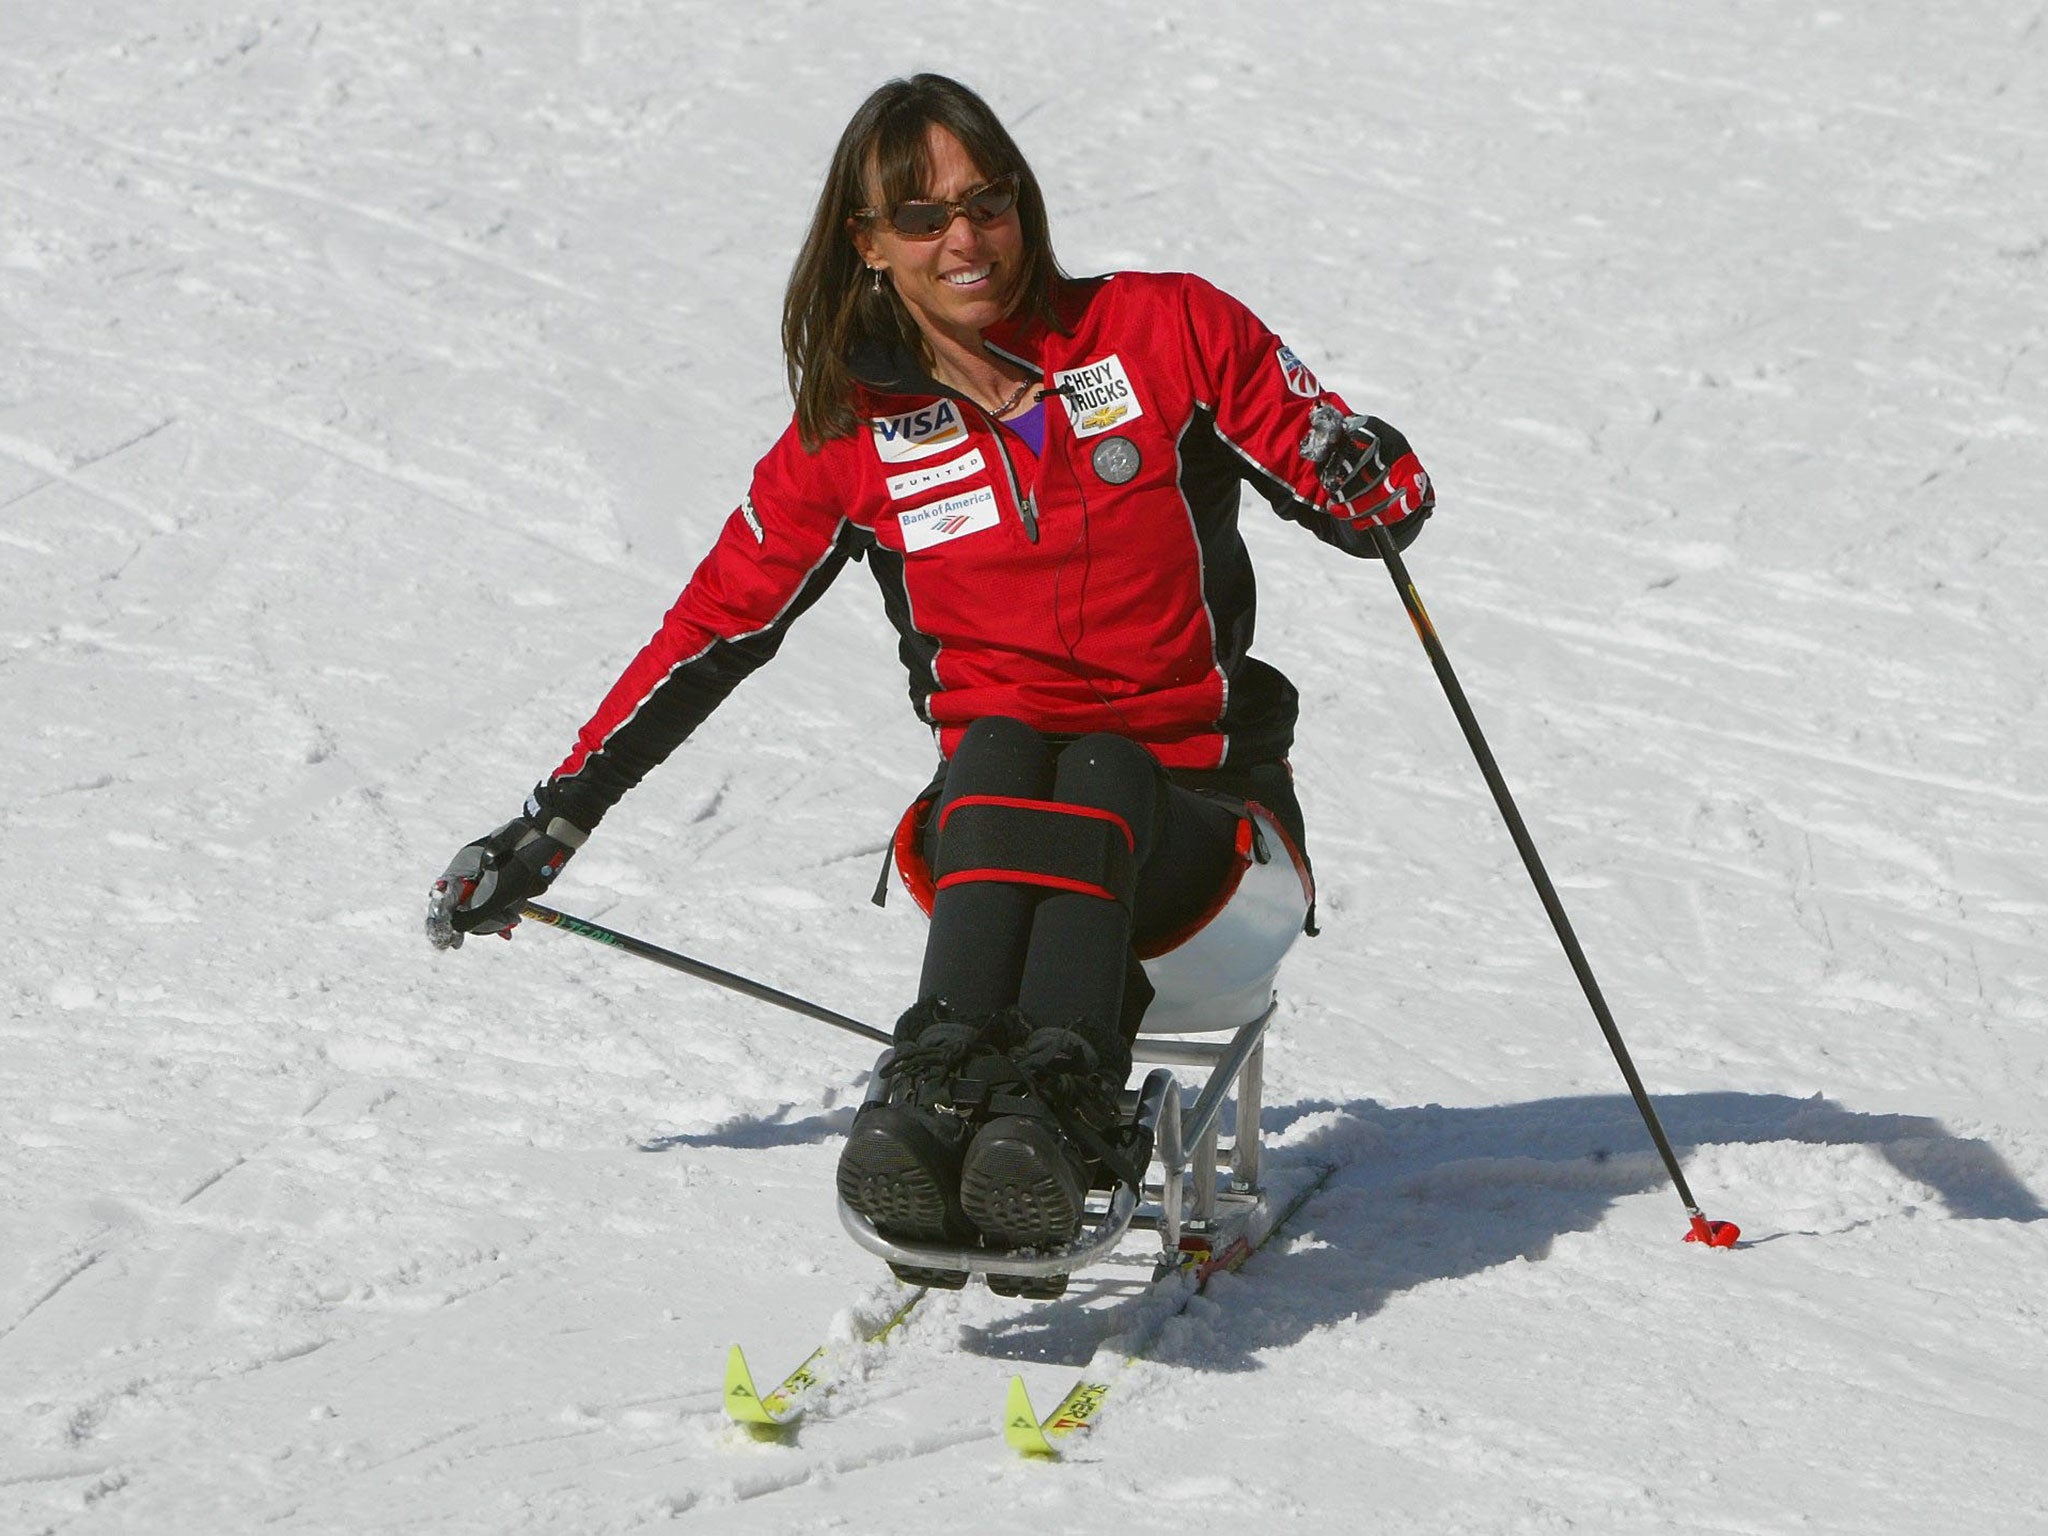 Candace Cable says America's attitude to disabled athletes needs vast improvement